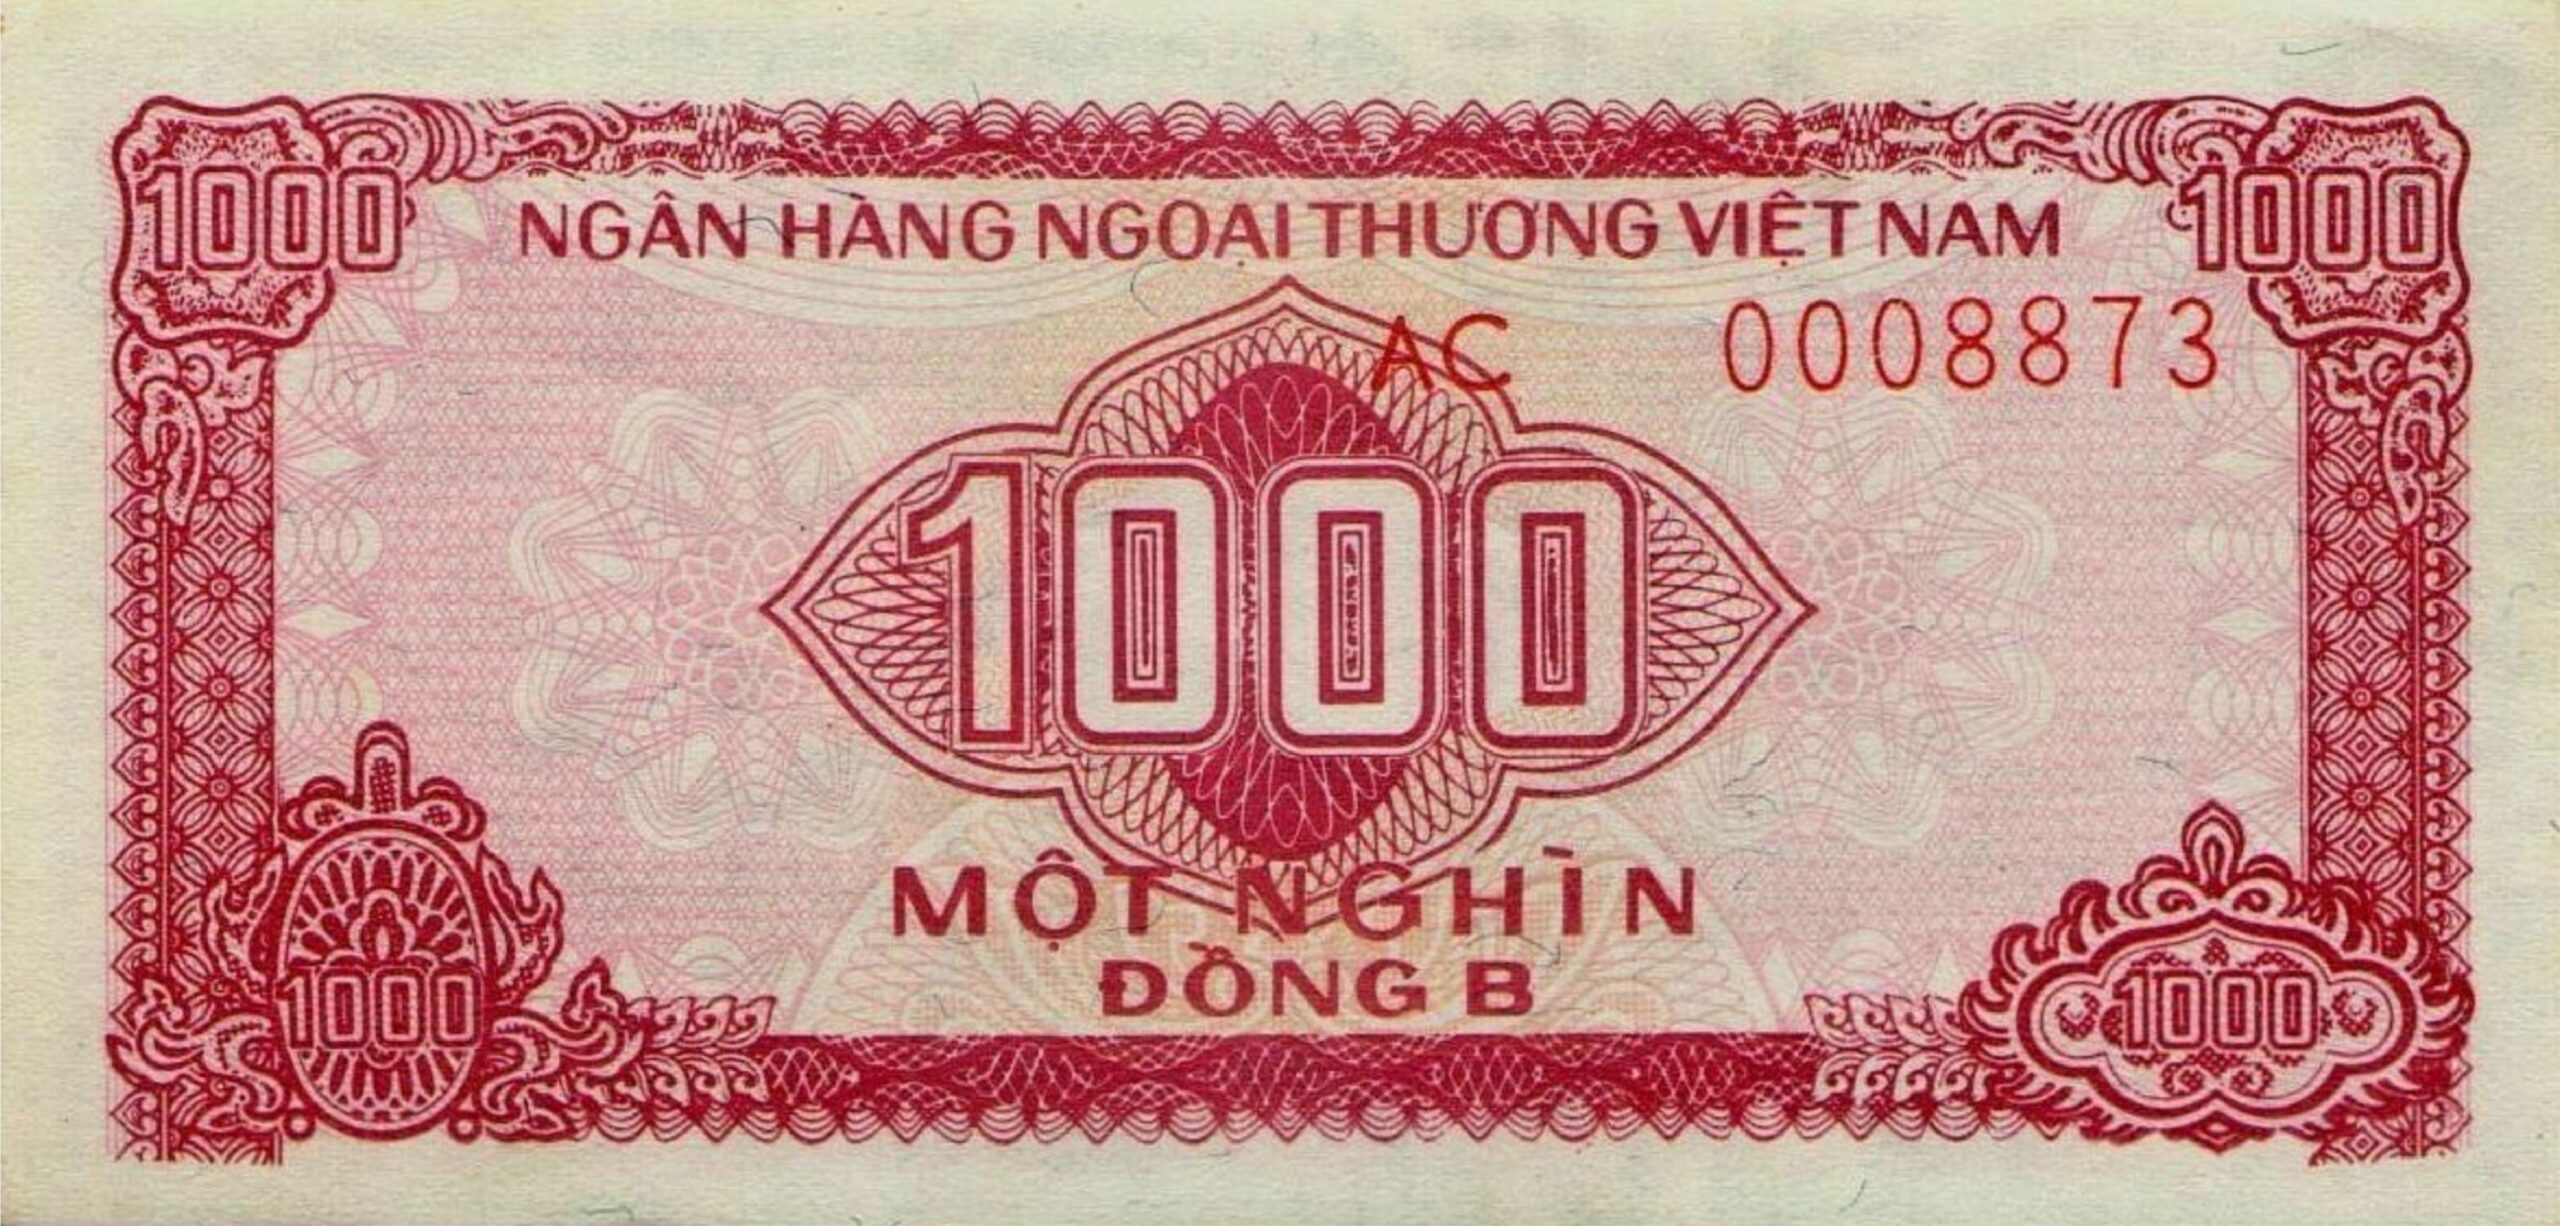 1000 Vietnamese Dong foreign exchange certificate